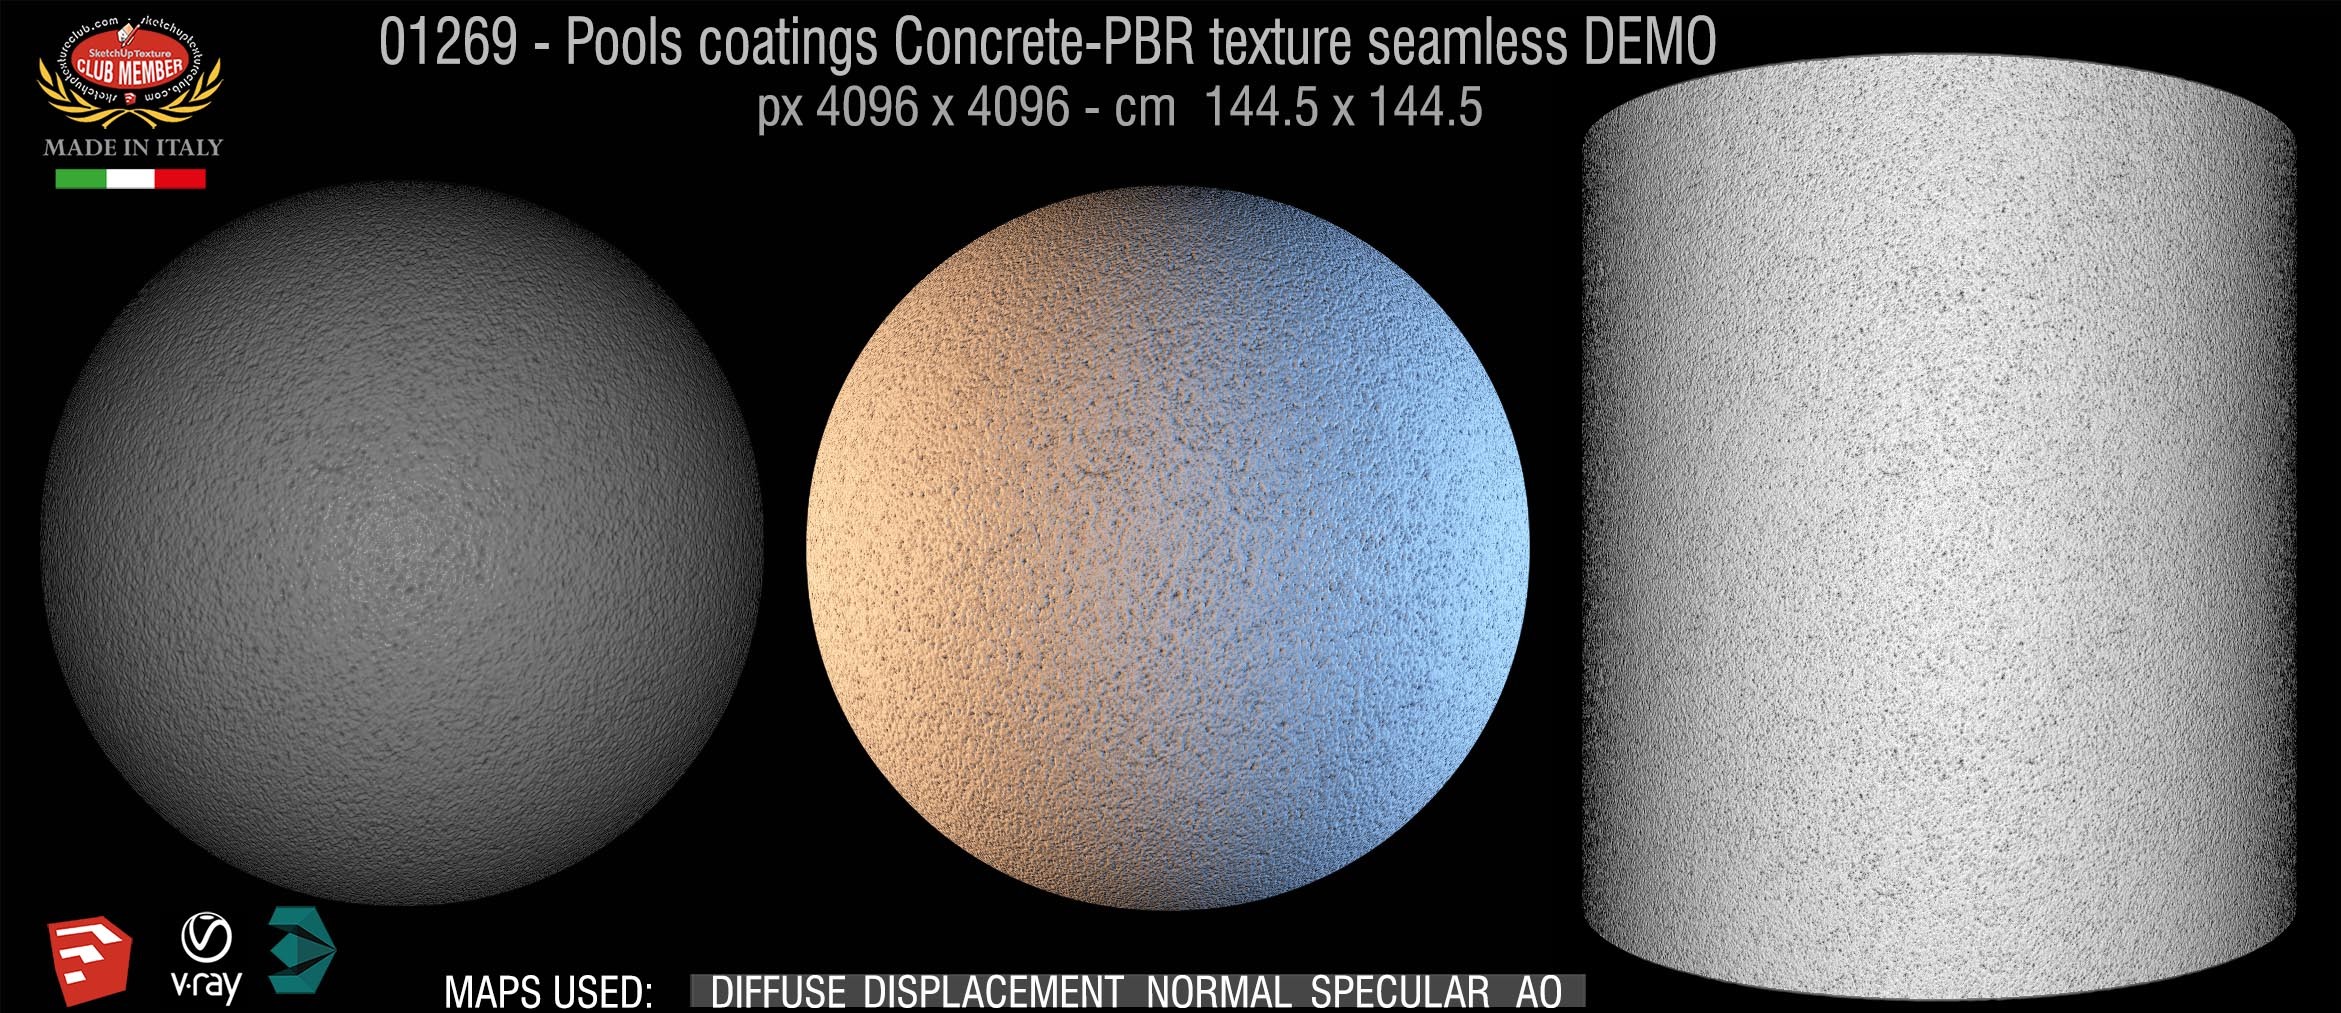 01269 Pools coatings Concrete-PBR texture seamless DEMO